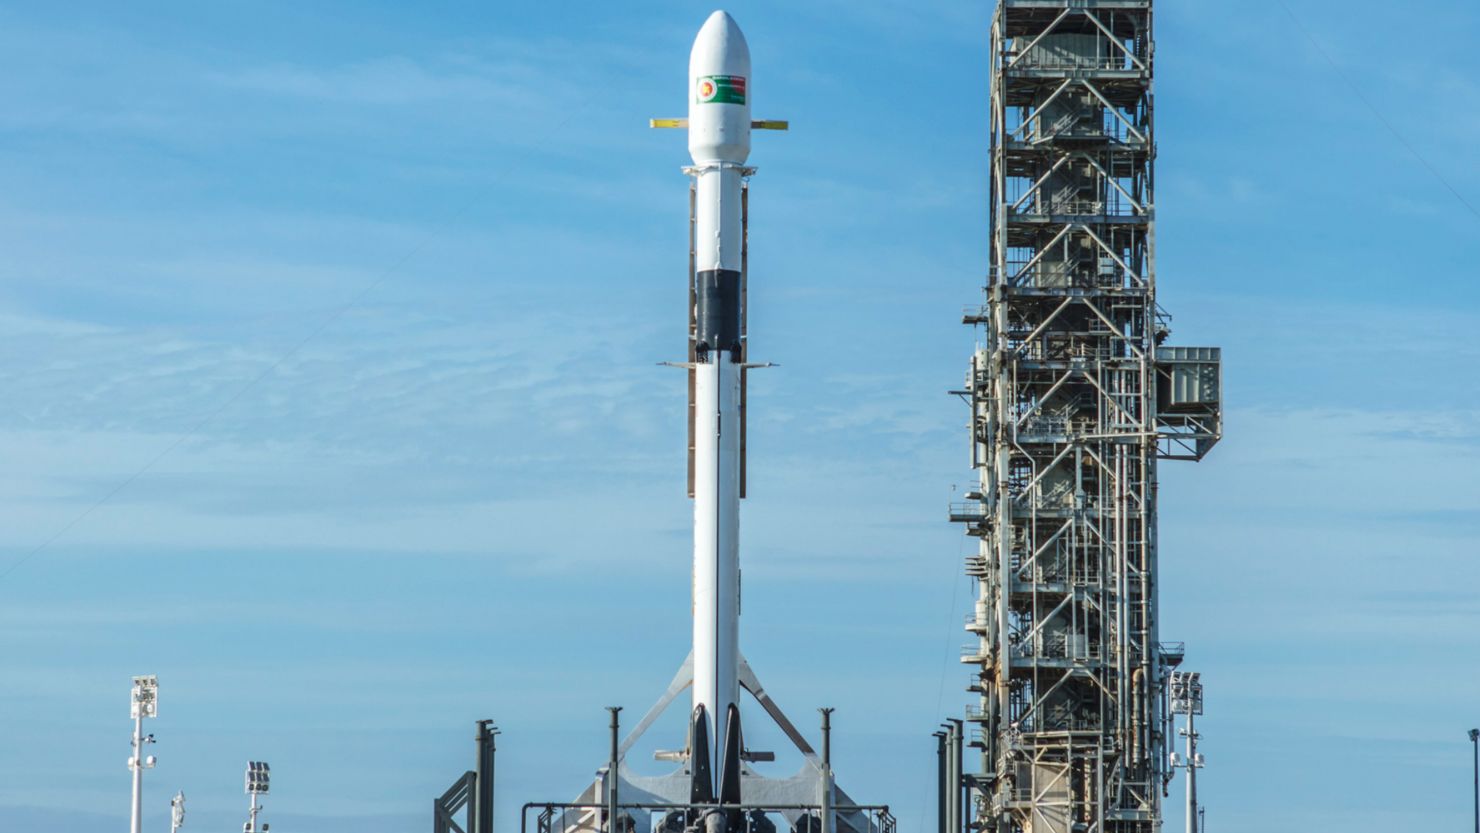 Delays facing SpaceX and Boeing may leave NASA on the ground, the GAO warns.